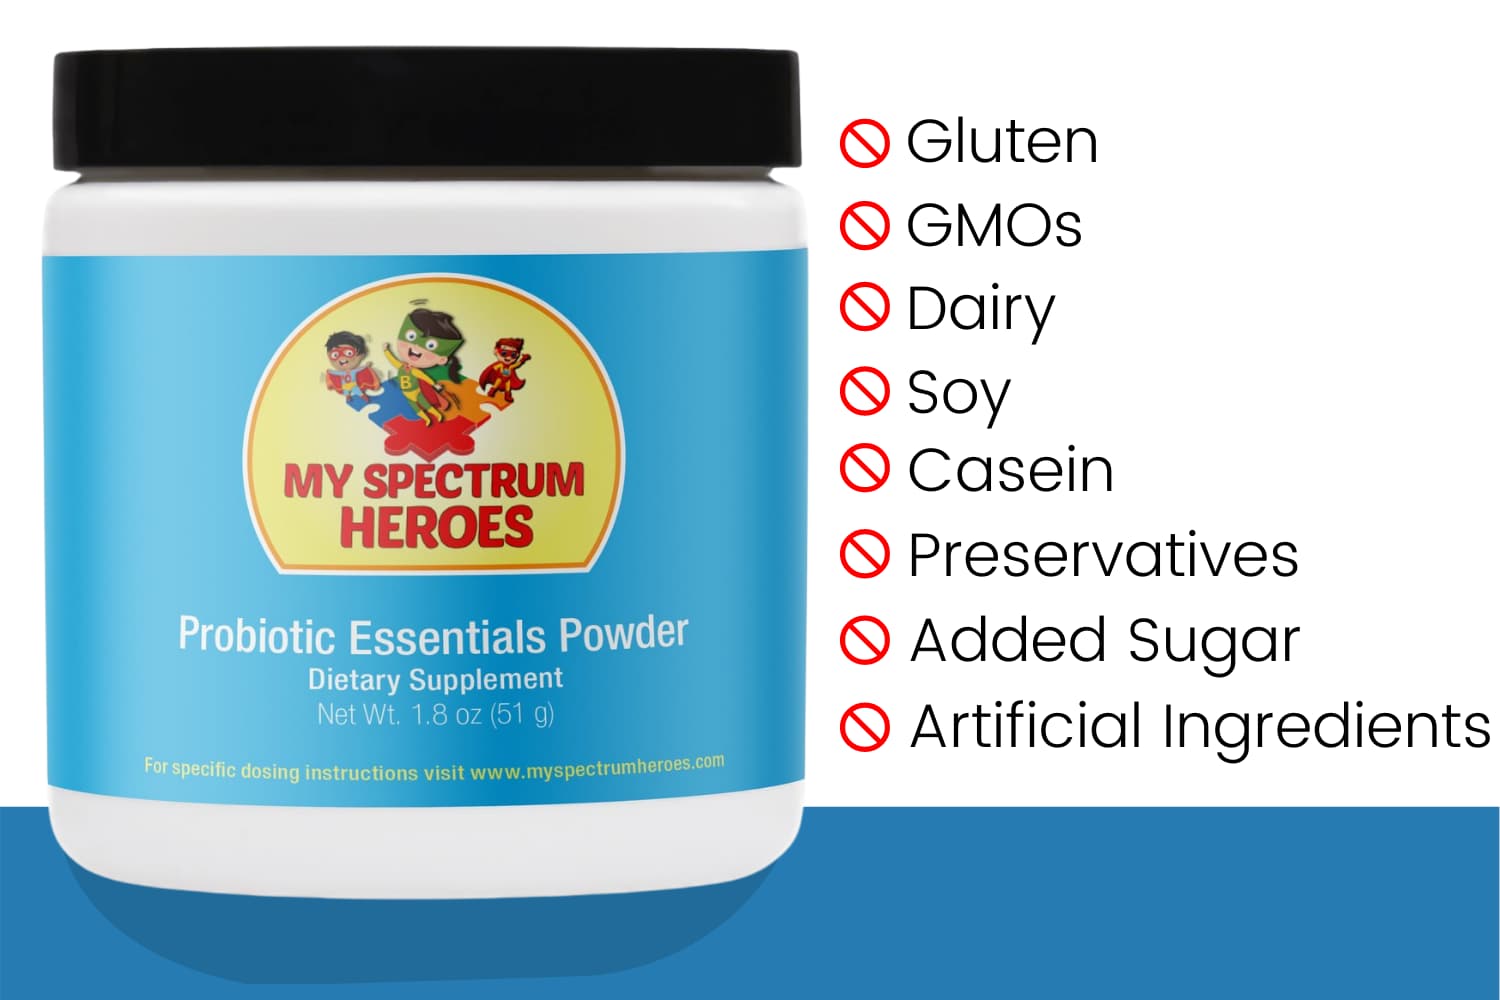 Probiotic Essentials Powder For Children With Autism And Adhd My